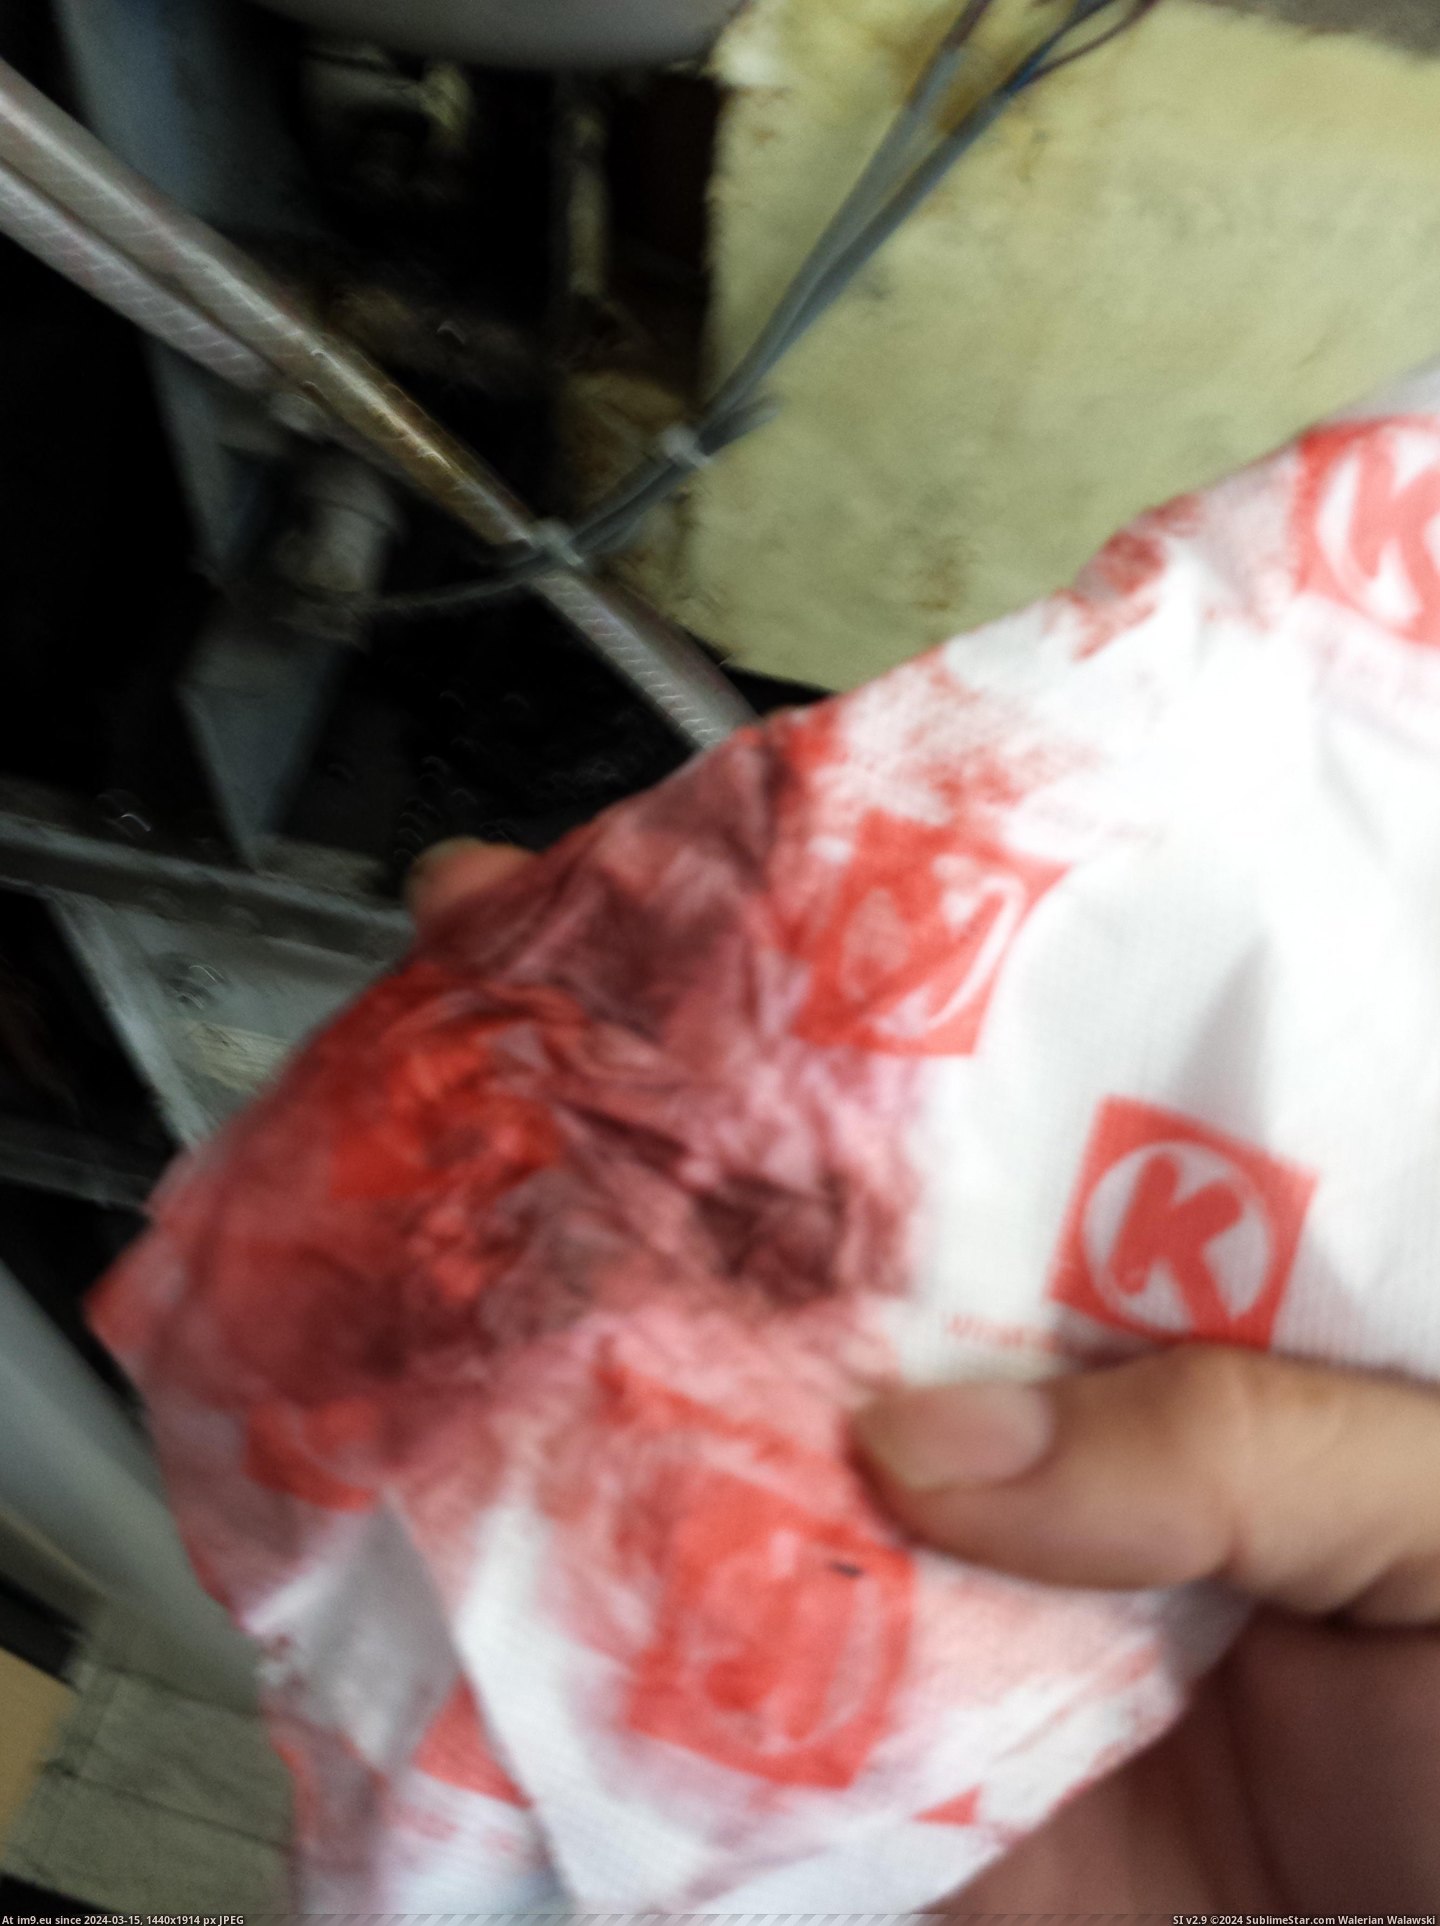 #Wtf #Drink #Frozen #Coke #Regularly #Beverage #Froster #Service #Anymore #Machines [Wtf] I service Froster frozen beverage machines regularly, and because of it, I don't drink coke anymore. 1 Pic. (Image of album My r/WTF favs))